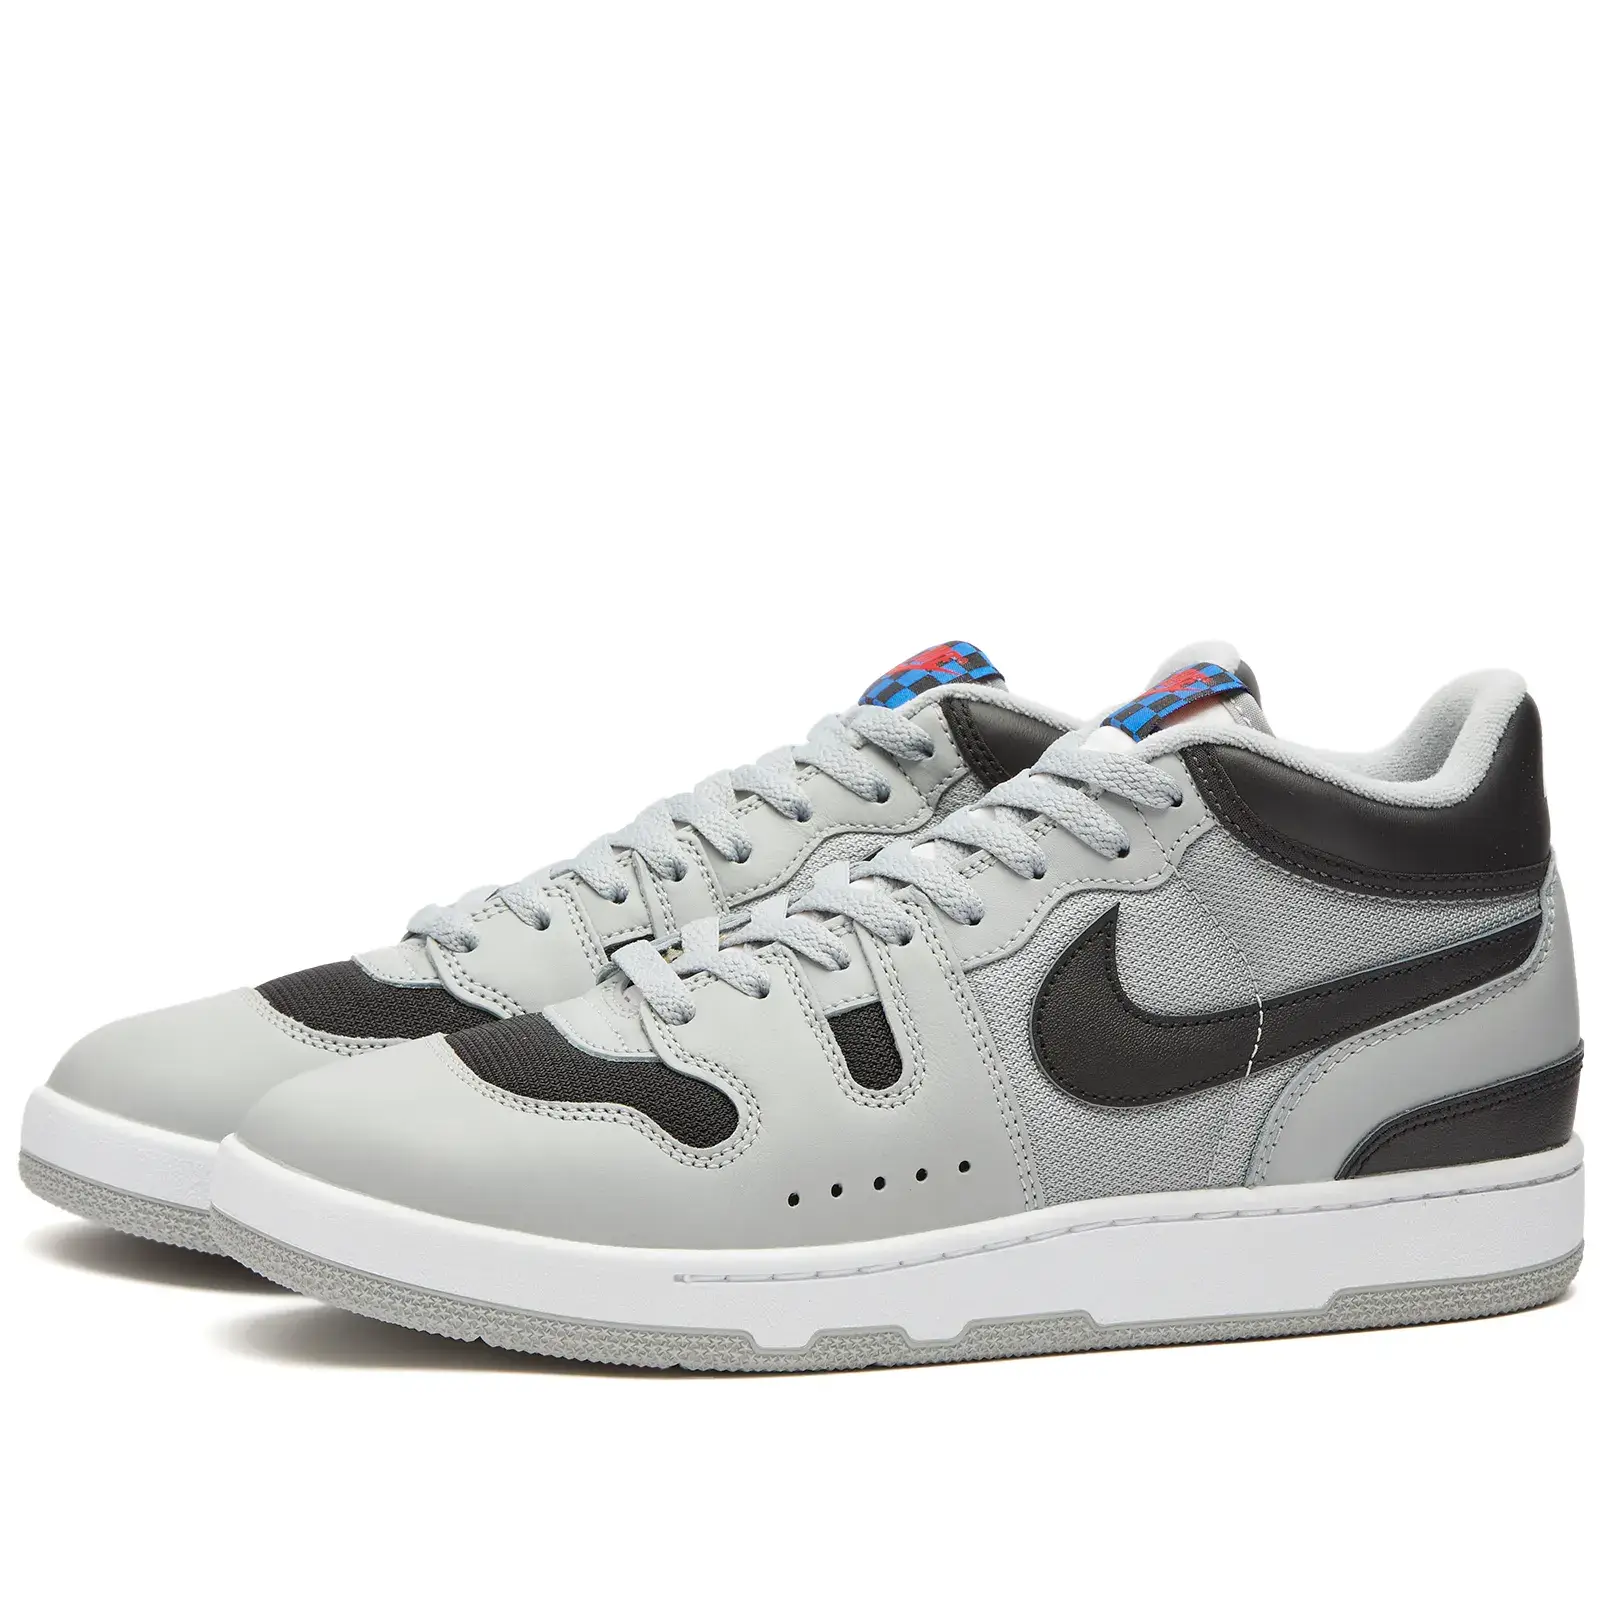 Nike Attack QS SP Discounts and Cashback